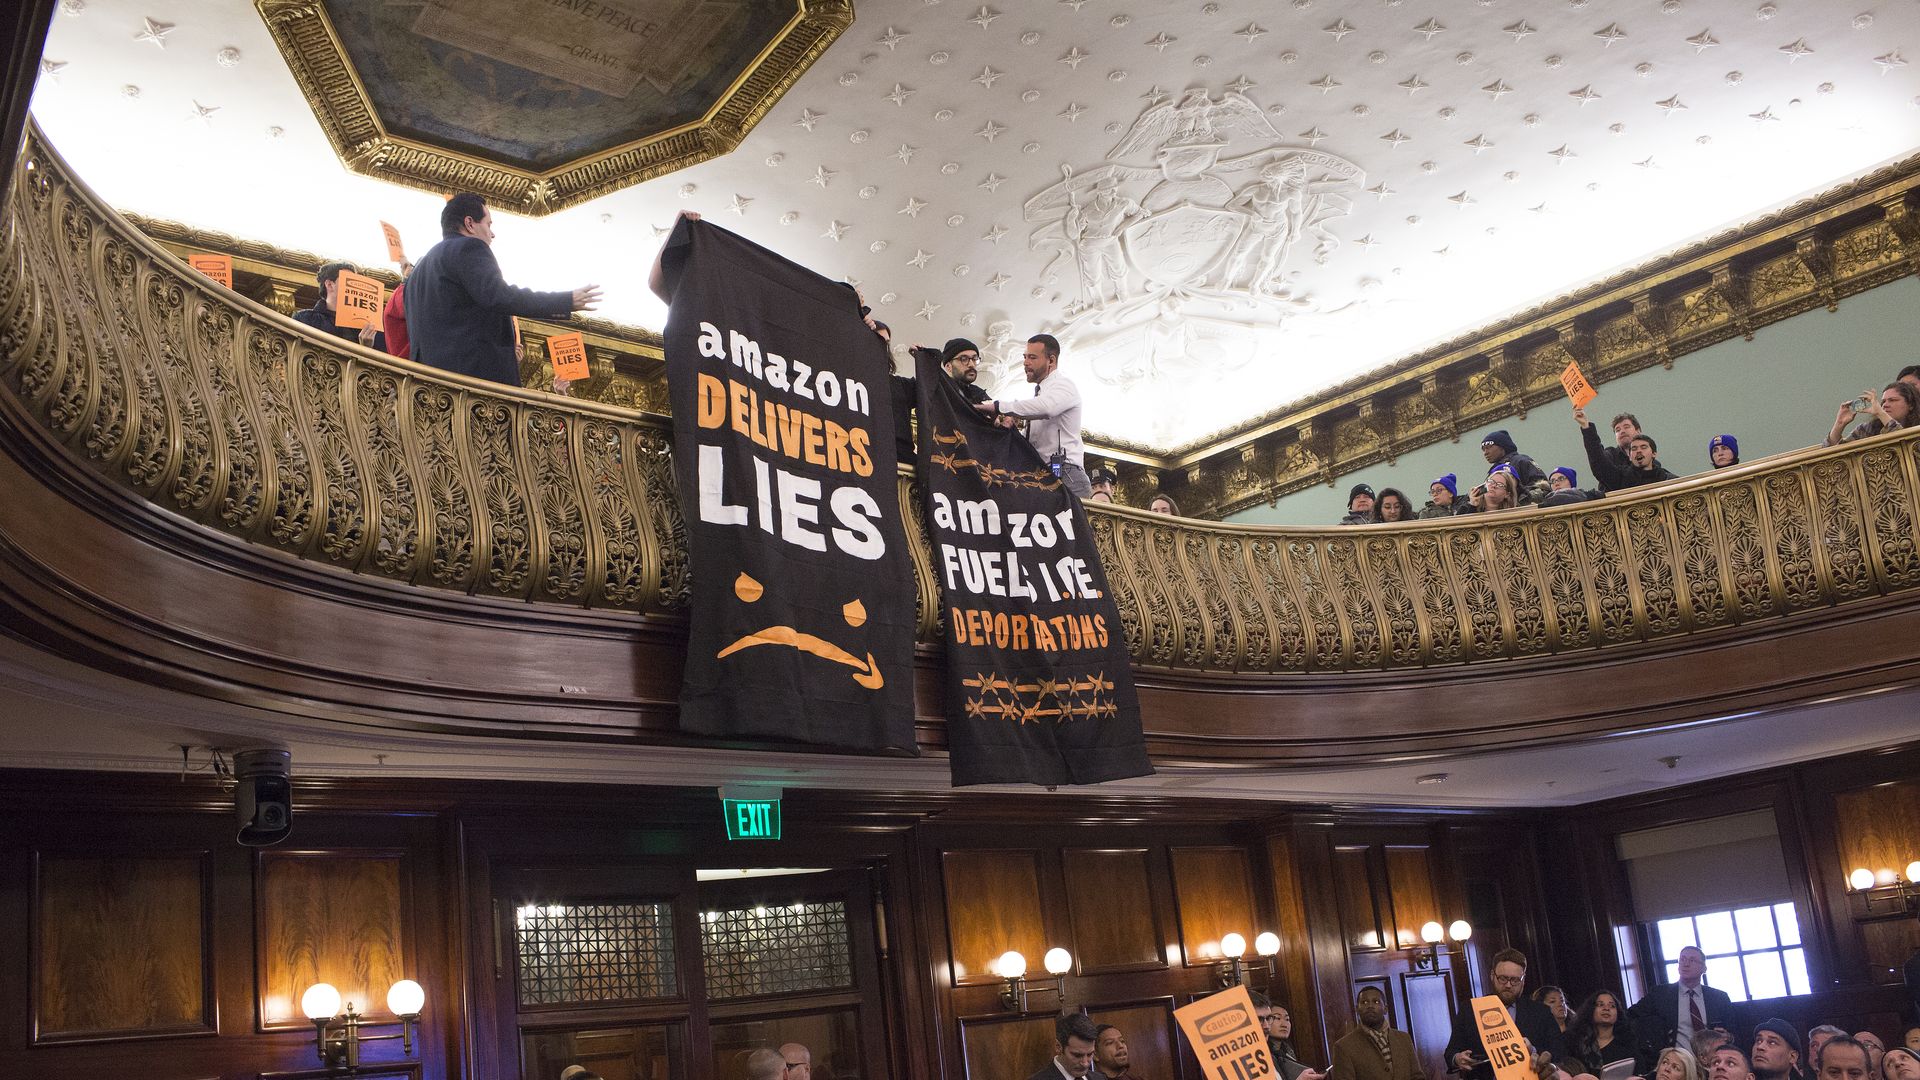 Photo of protestors at NYC council meeting on Amazon HQ2 at end of January 2019.